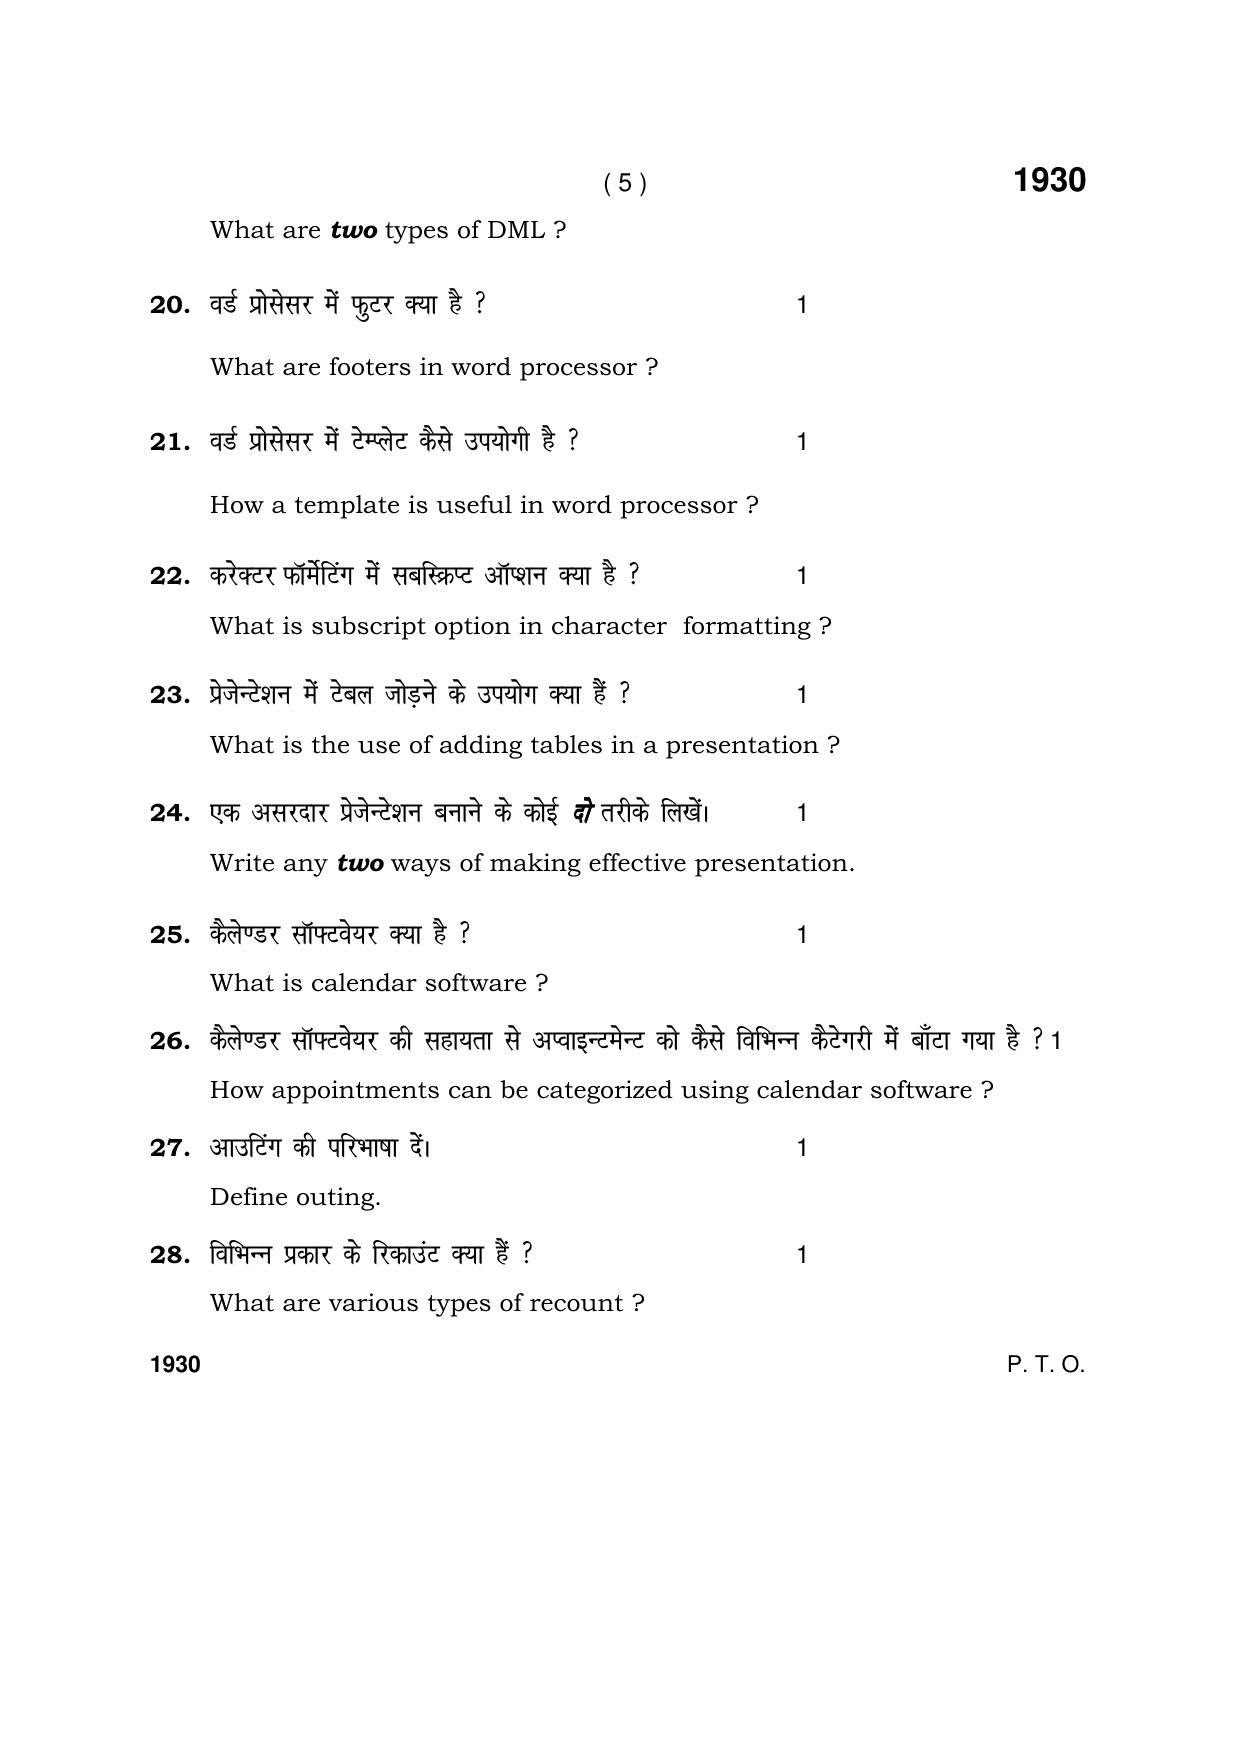 Haryana Board HBSE Class 10 IT & ITES 1930 (Level-2) 2017 Question Paper - Page 5